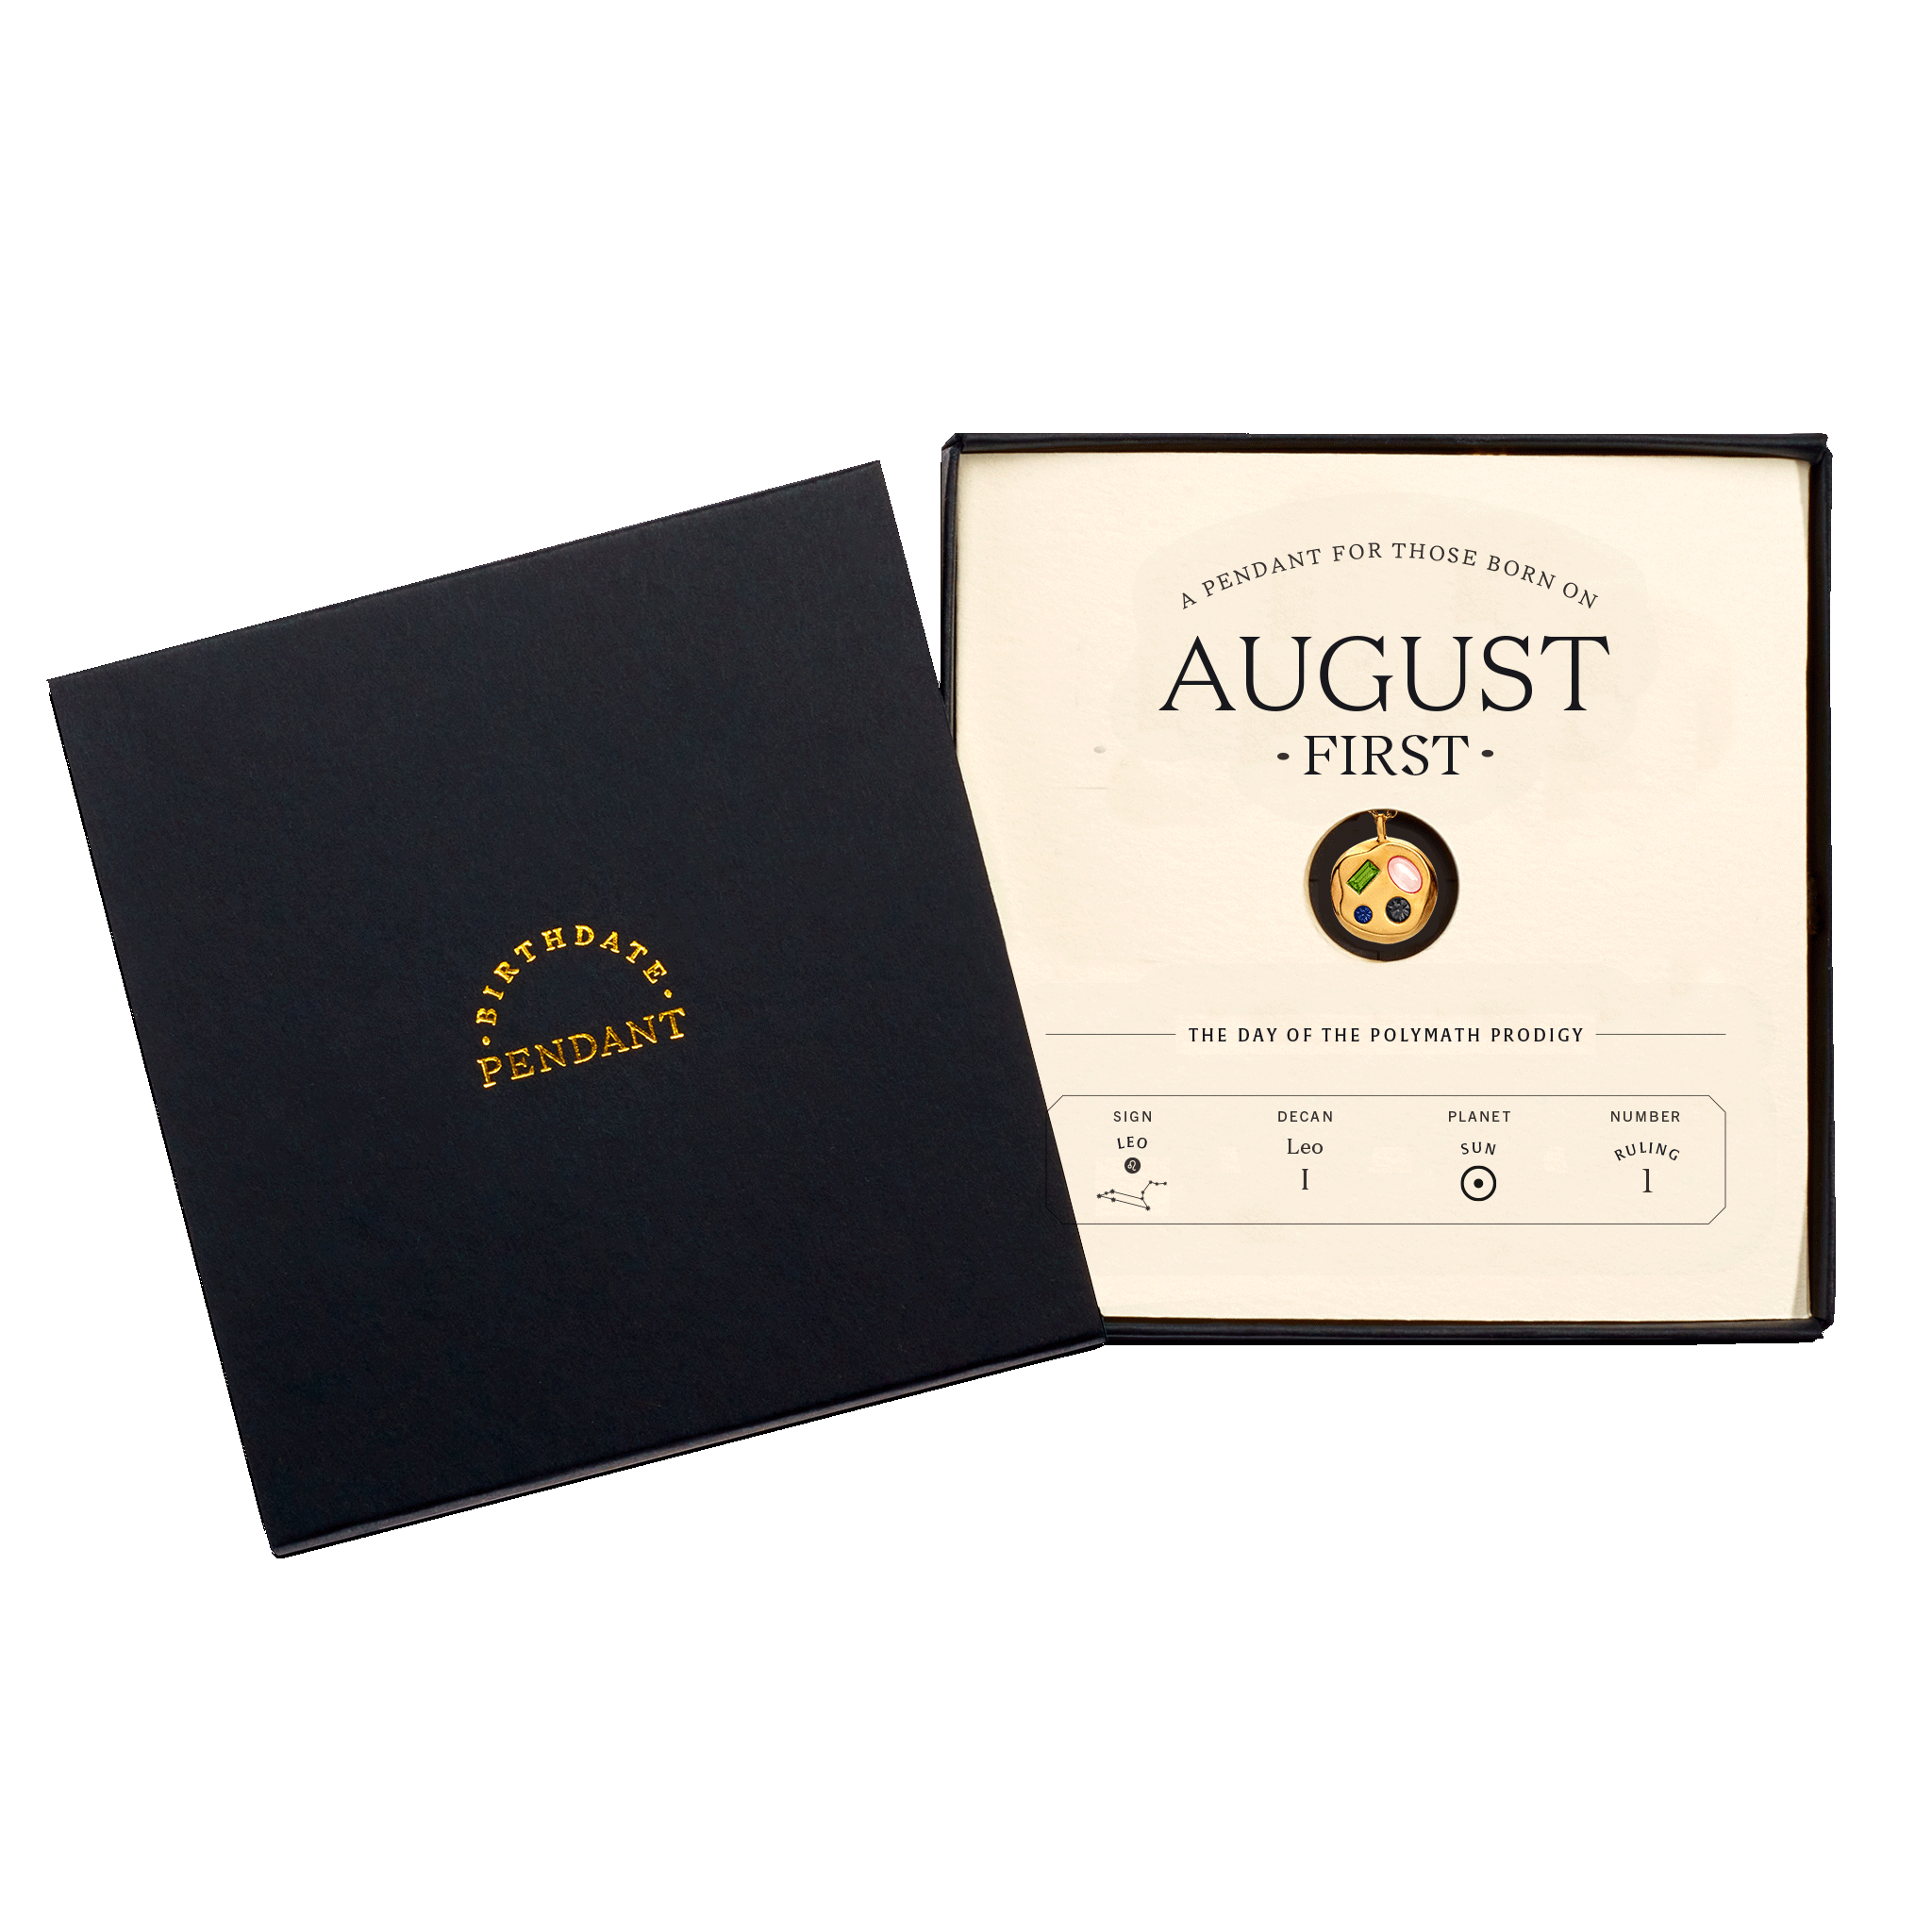 The August First Pendant inside its box